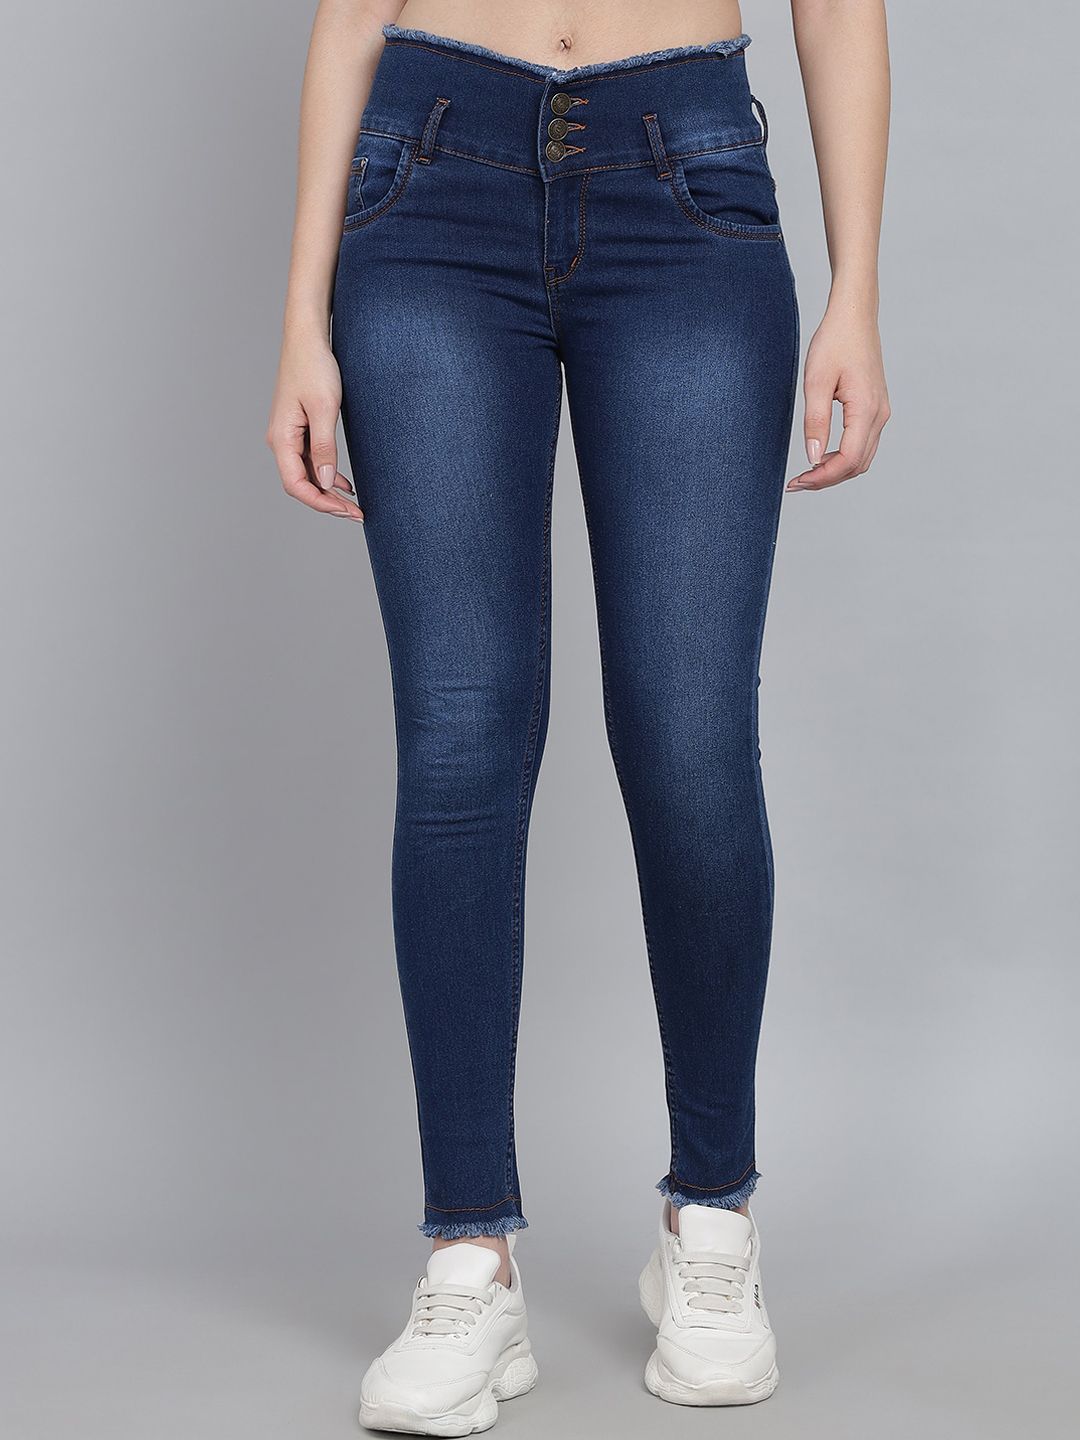 Q-rious Women Blue Slim Fit High-Rise Light Fade Stretchable Jeans Price in India